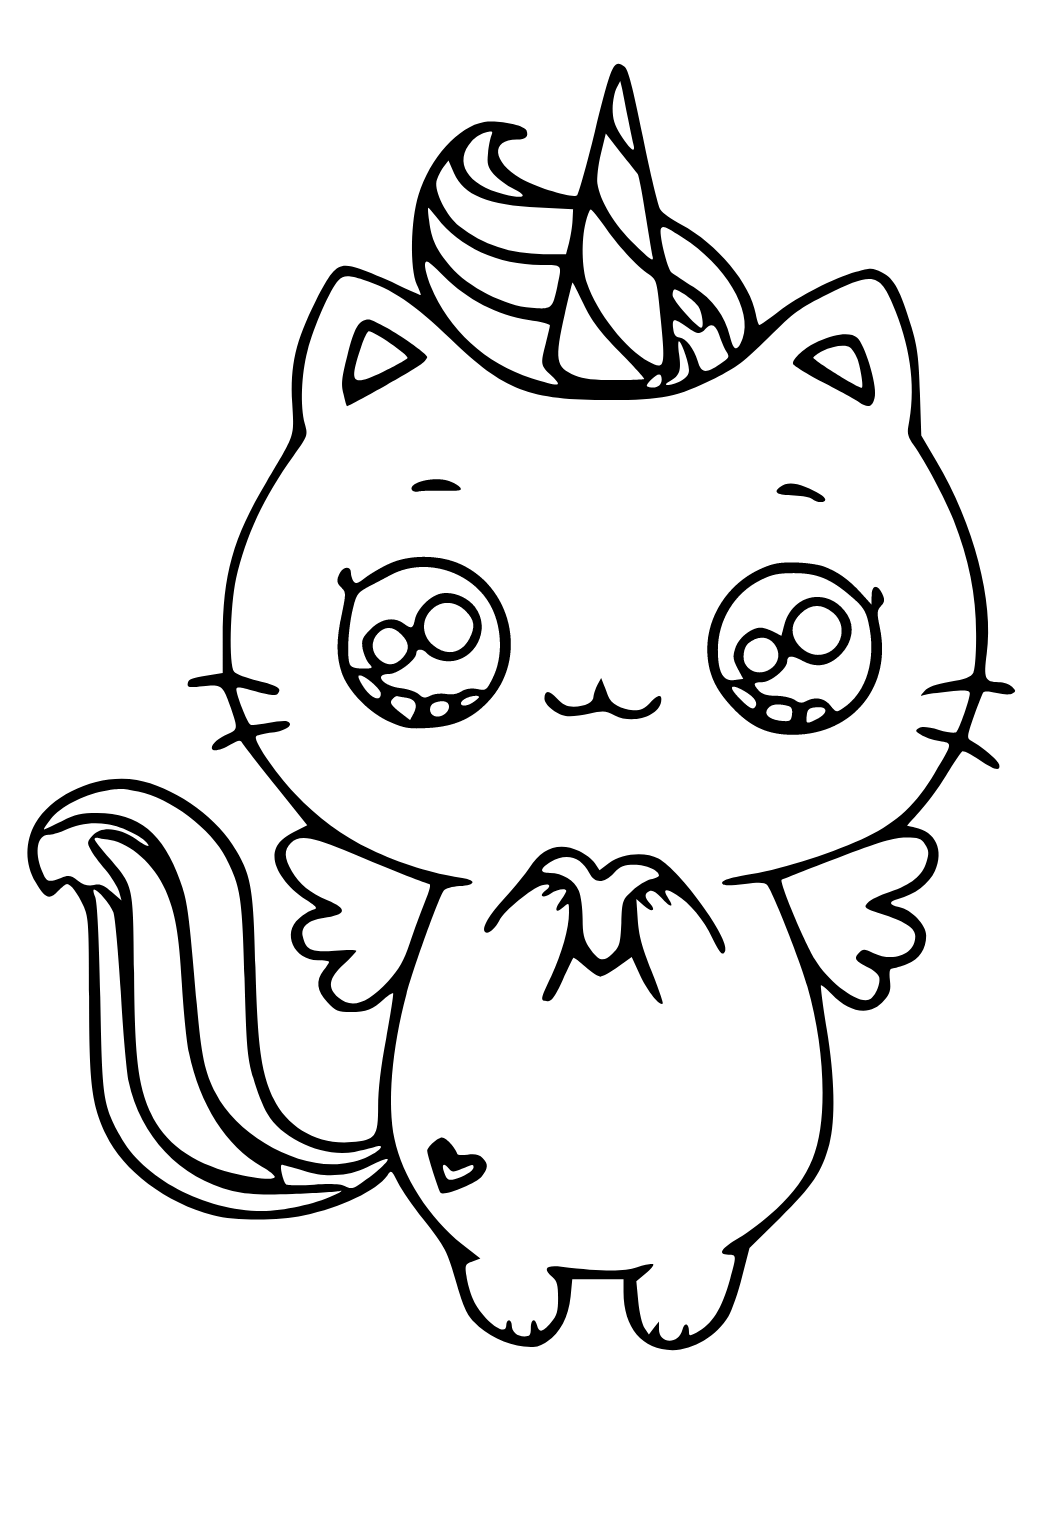 Free printable unicorn cat heart coloring page for adults and kids